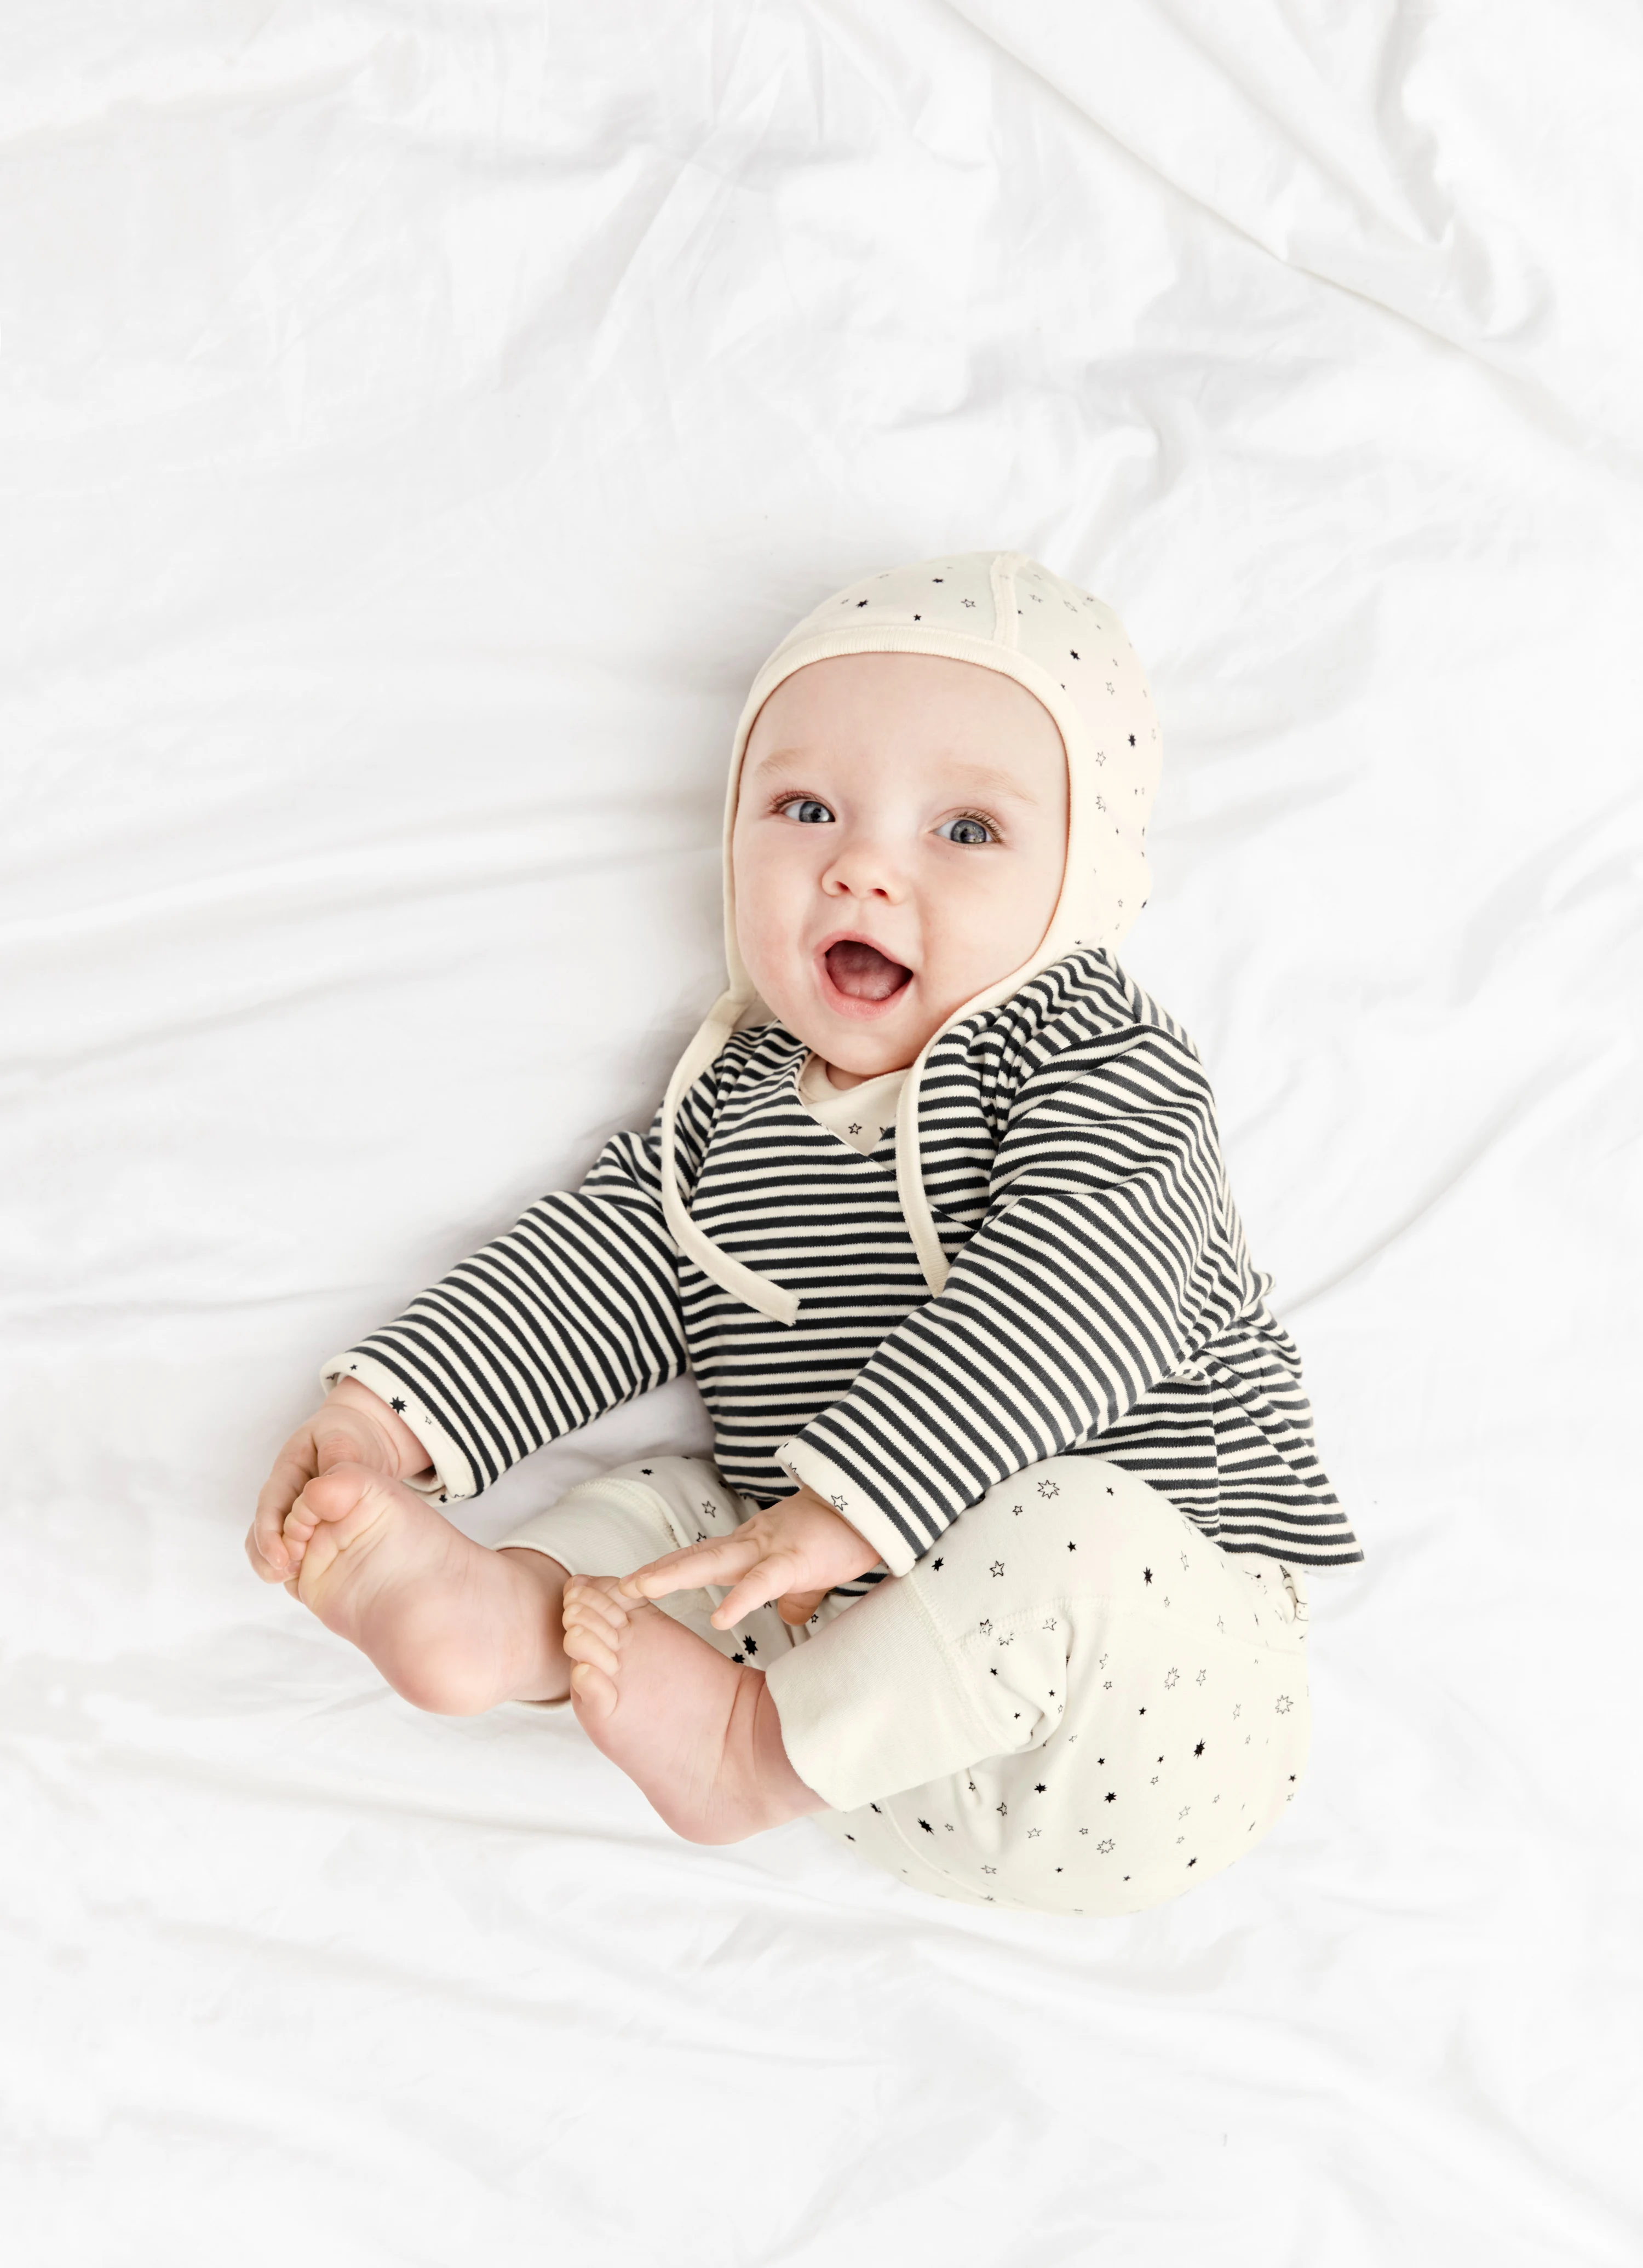 Hanna Andersson Organic Pima Cotton Layette Collection